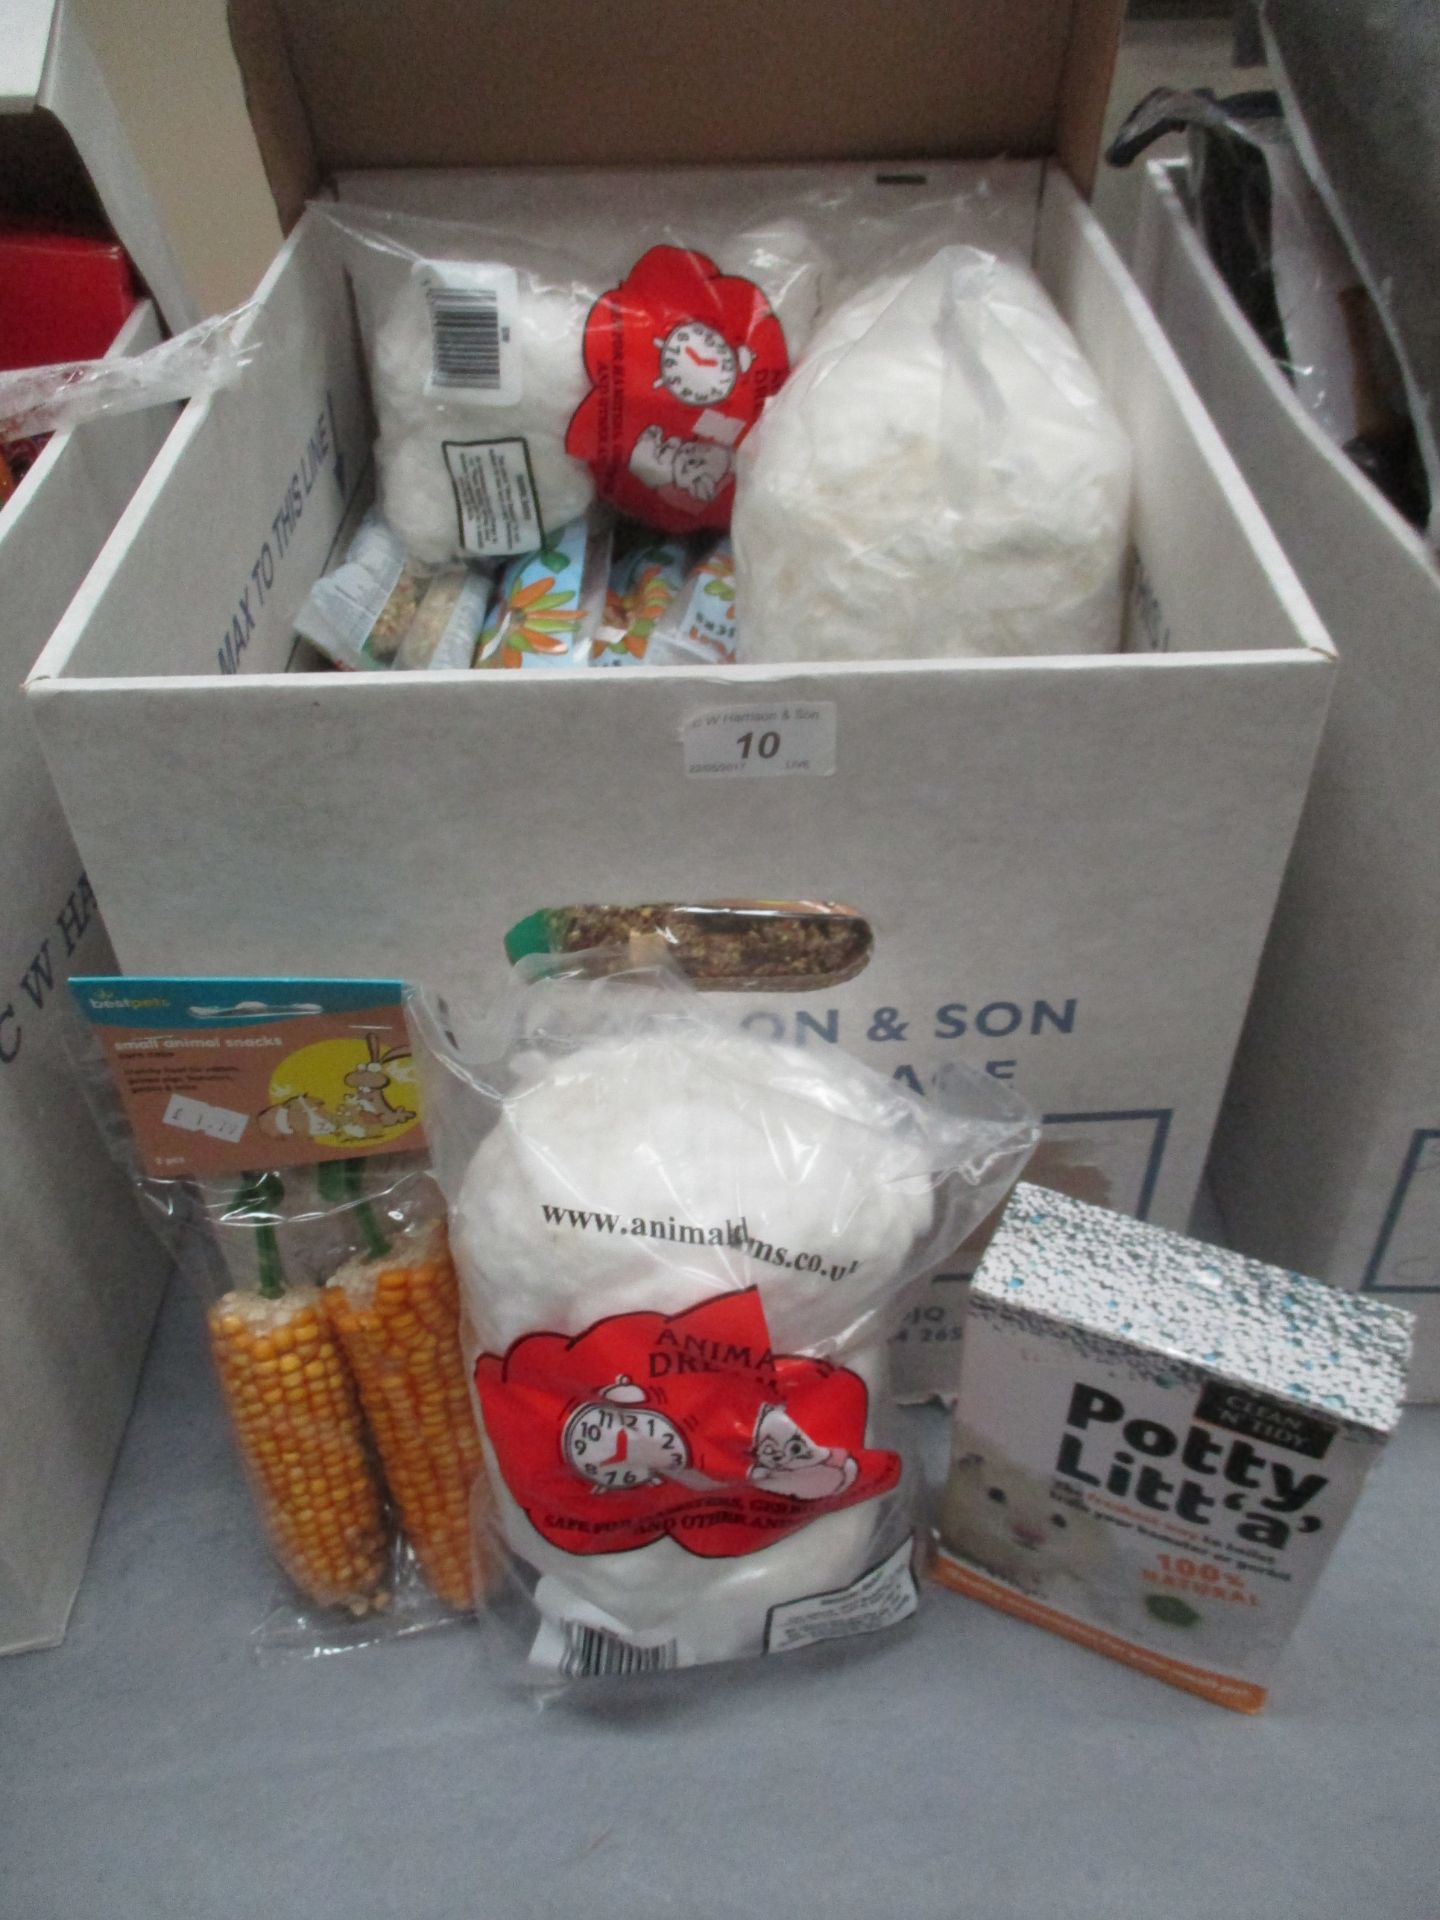 Contents to box - hutch covers, packs of small animal treats,